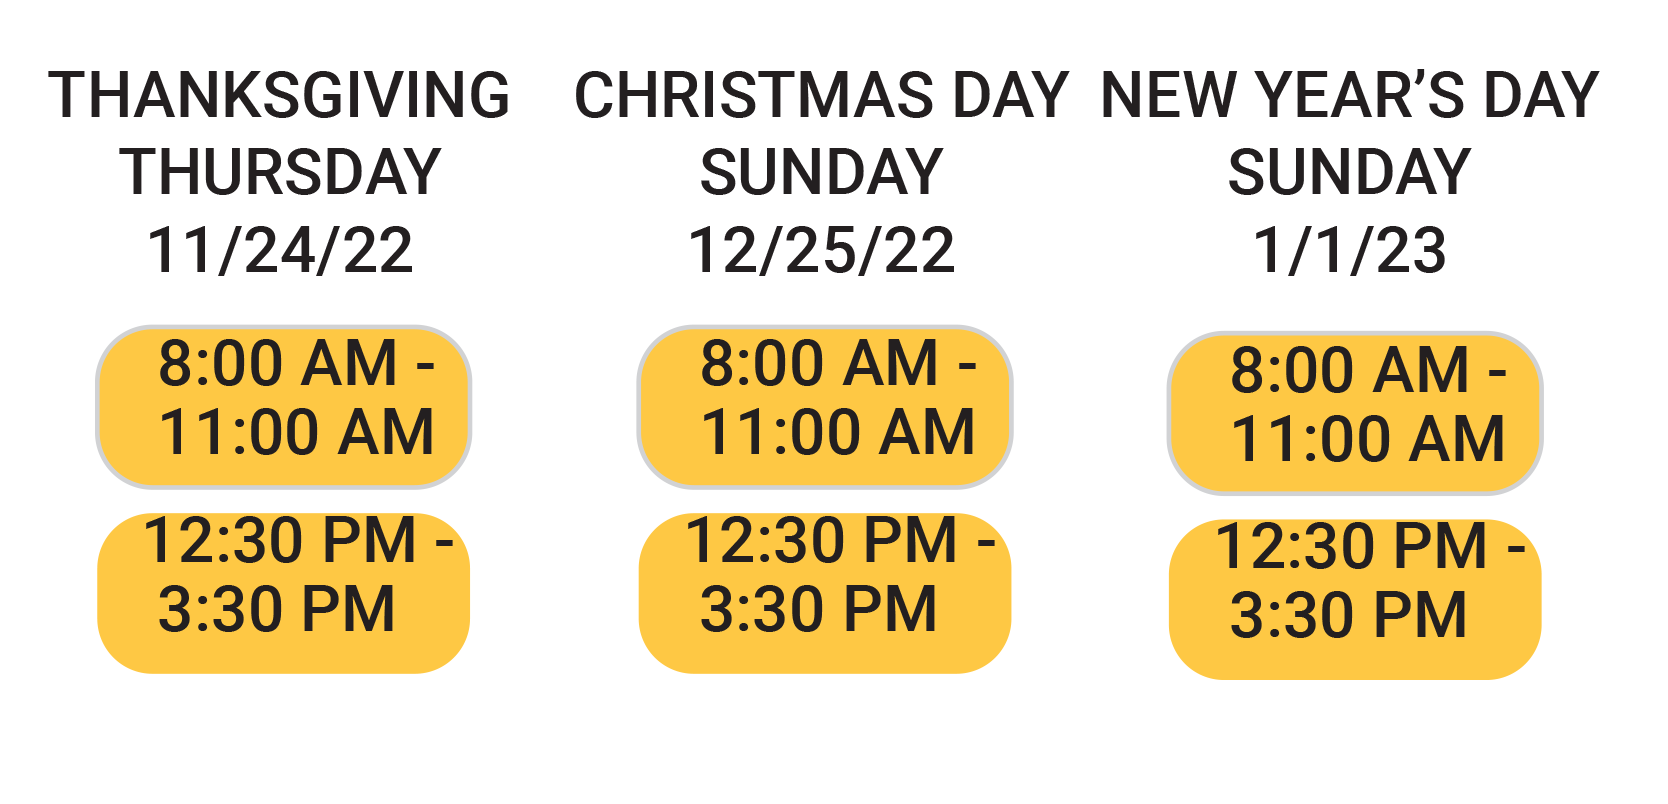 NCYF Holiday Schedule 2022 crop.png